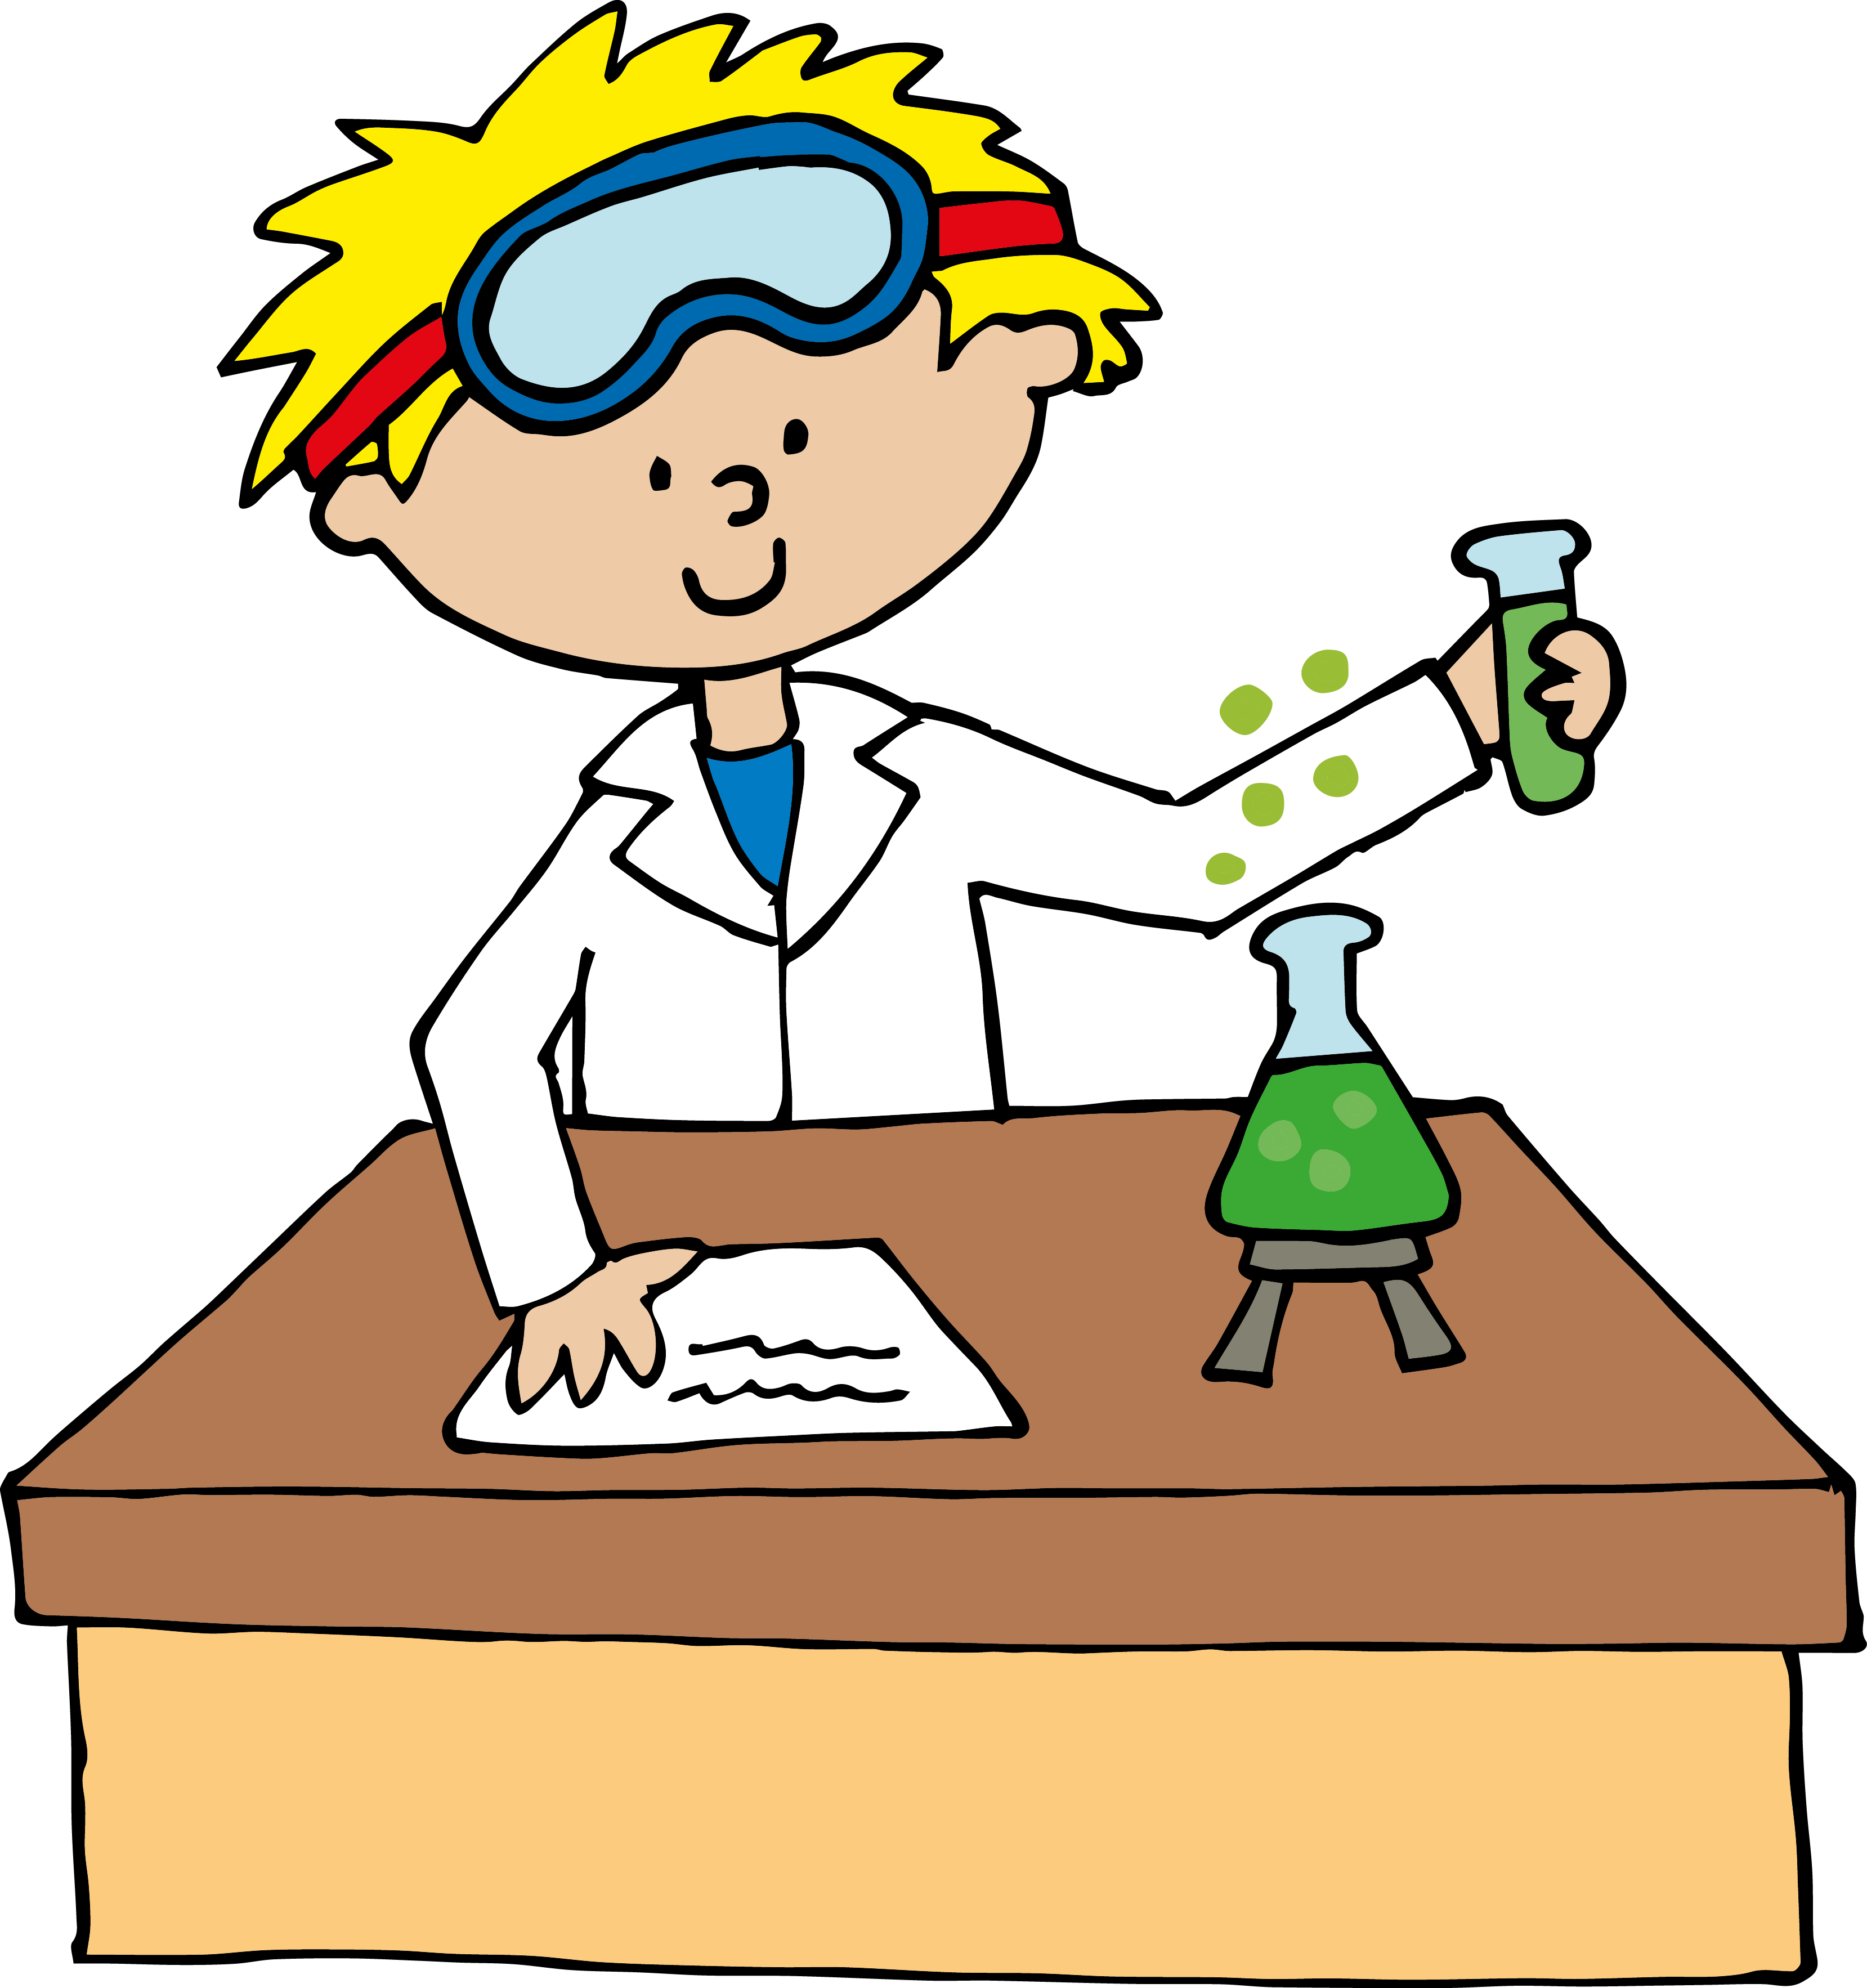 Free science clip art by phil